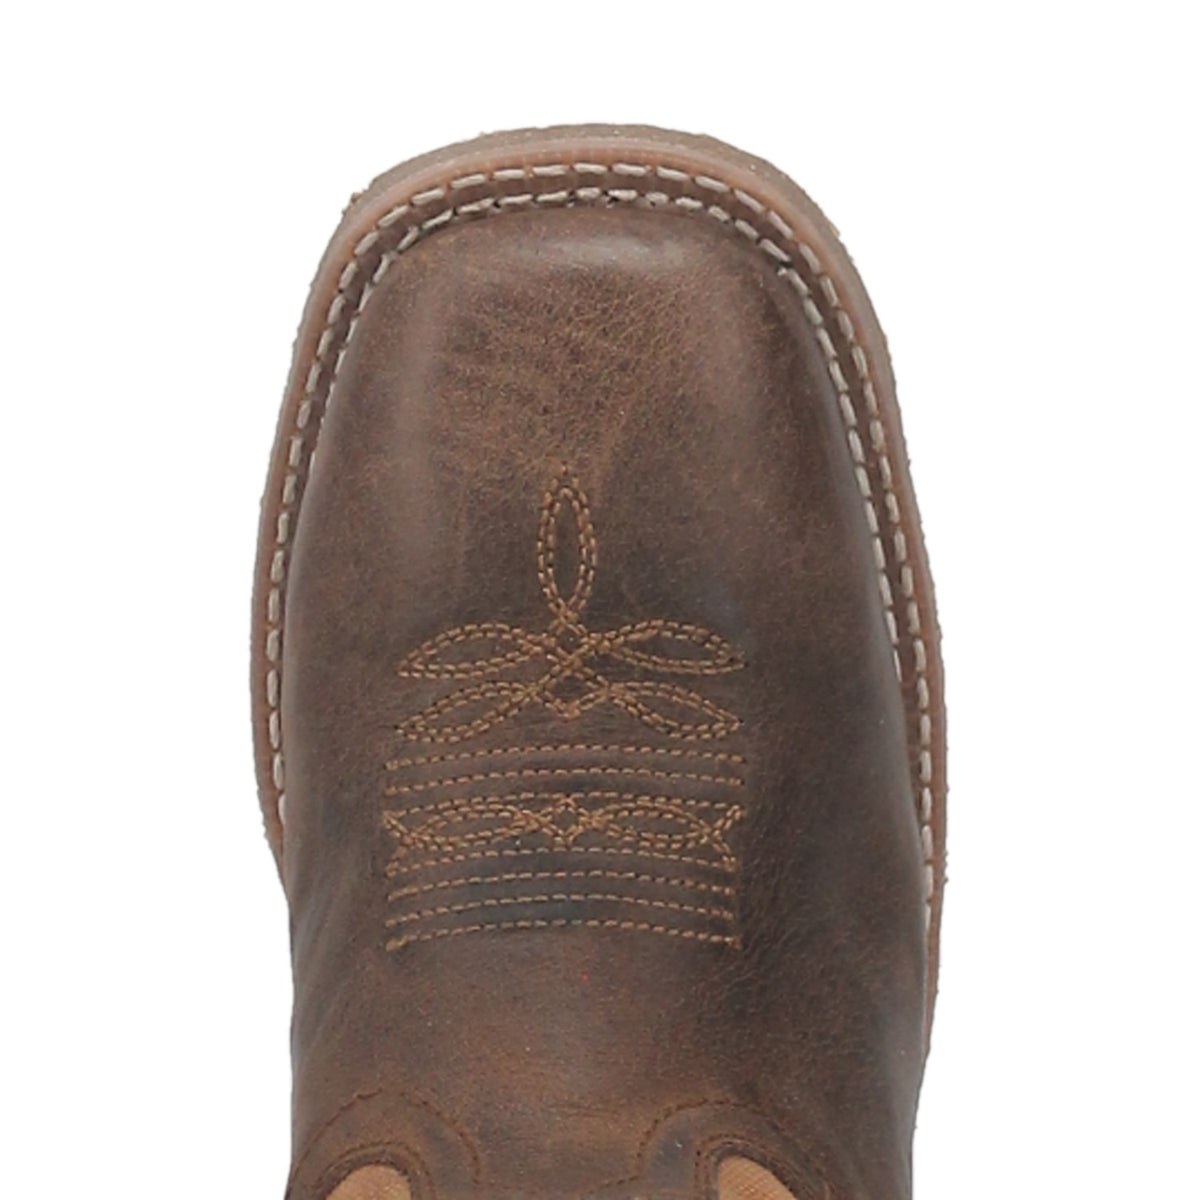 CANEY LEATHER BOOT Cover